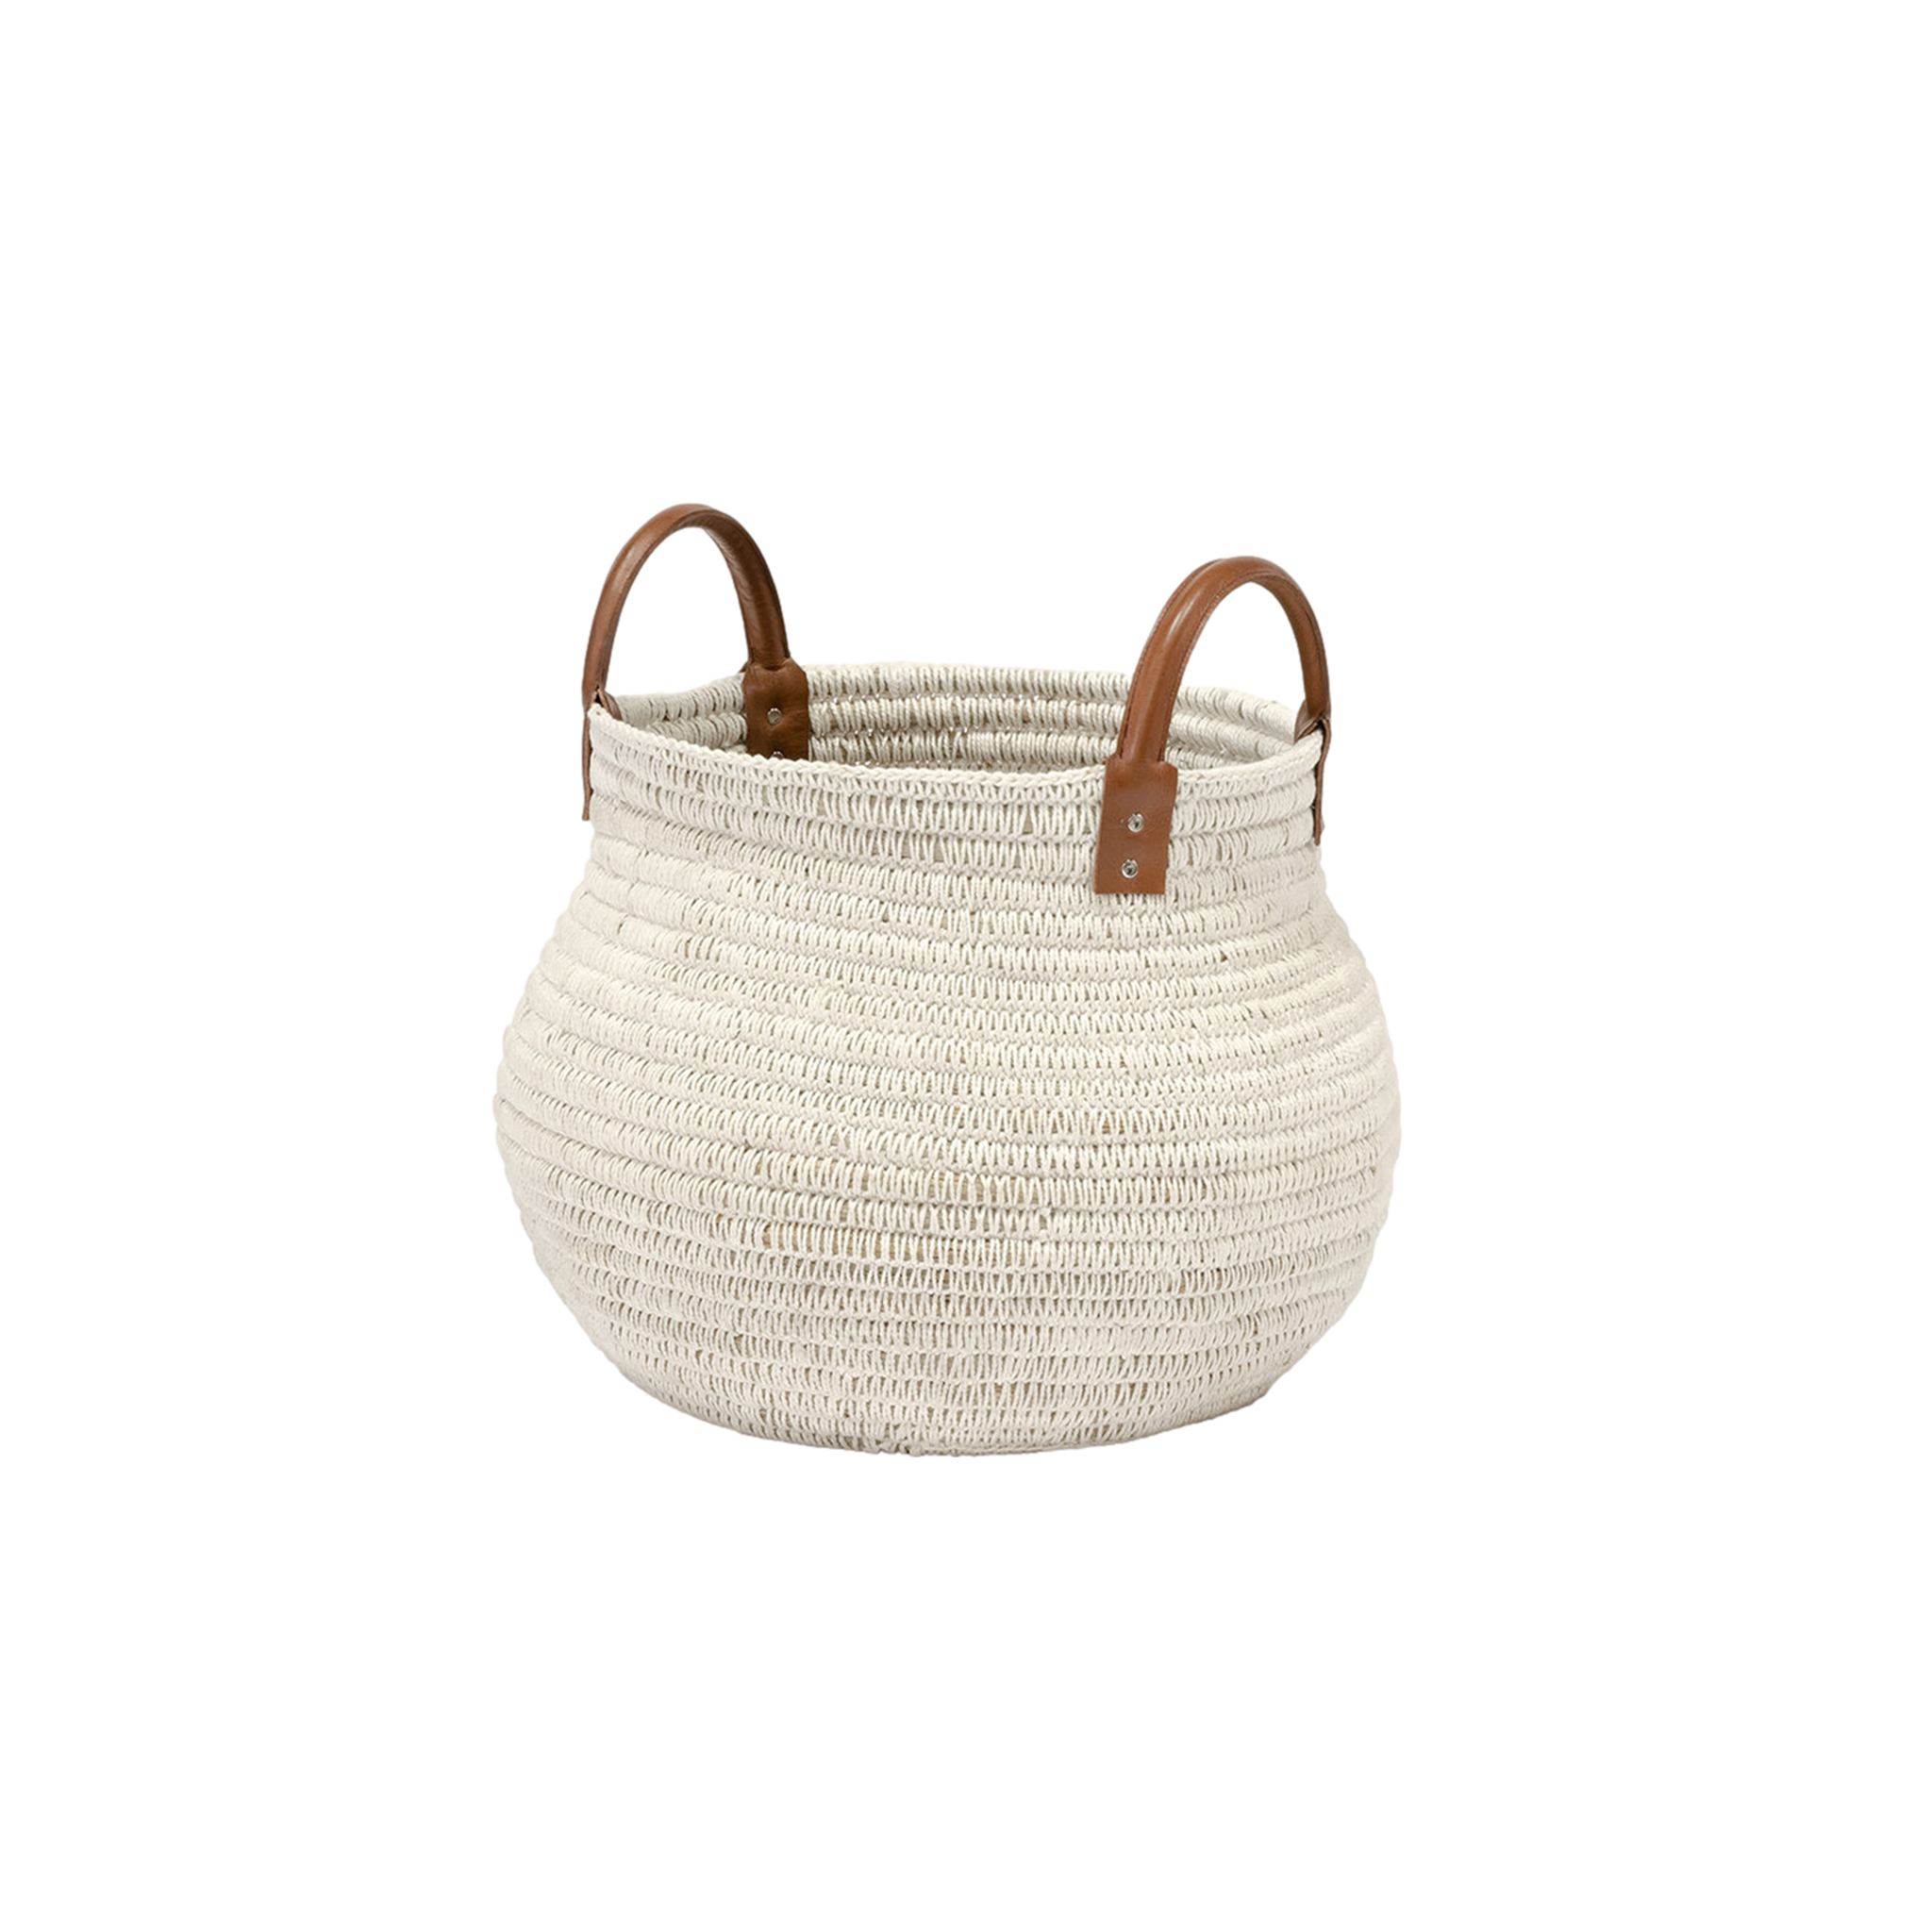 Cairo Basket in White (Large)